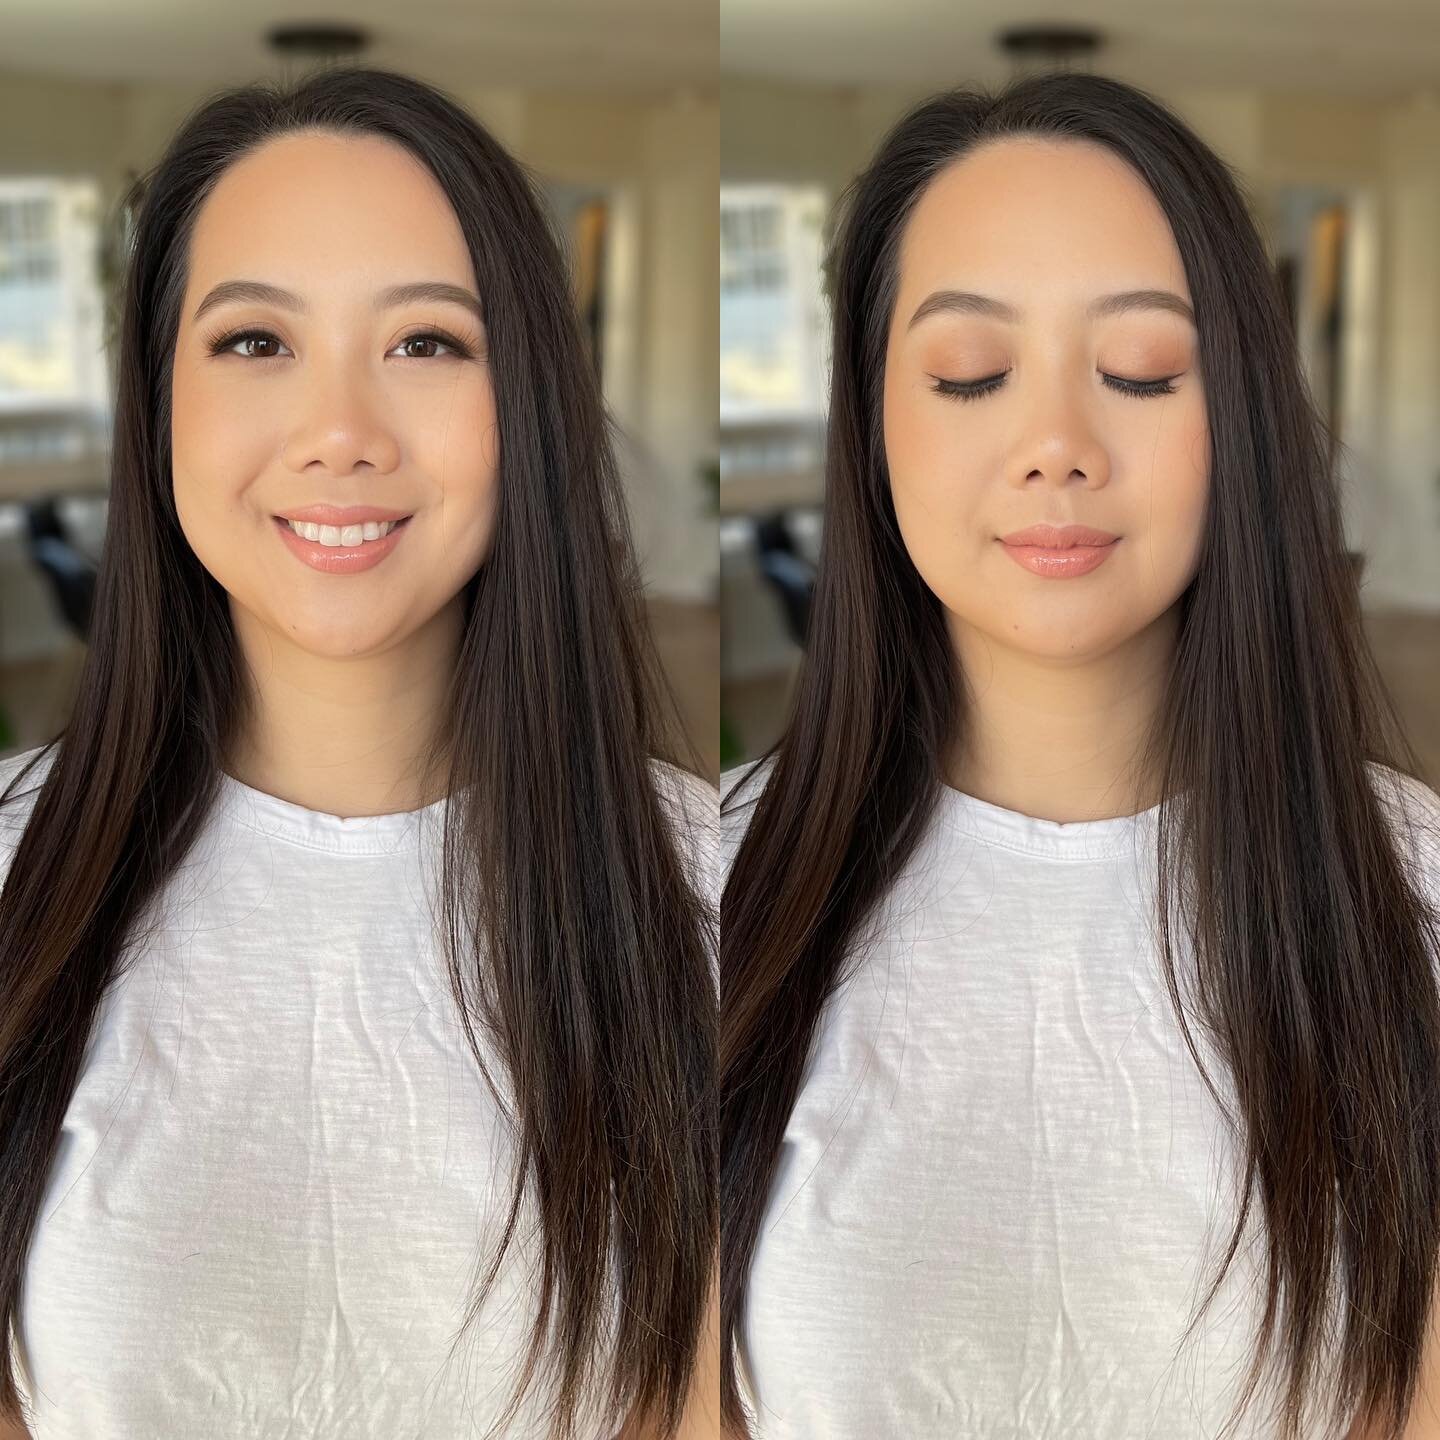 Thank you to my friends for always supporting what I do! 🙏🏼🥰
Makeup transformation for my friend K! Latte makeup with a hint of peach 🍑 to brighten up her complexion. This look is perfect!! 🧡🤎✨

Makeup by yours truly.
@lorrainemakeupartistry 

